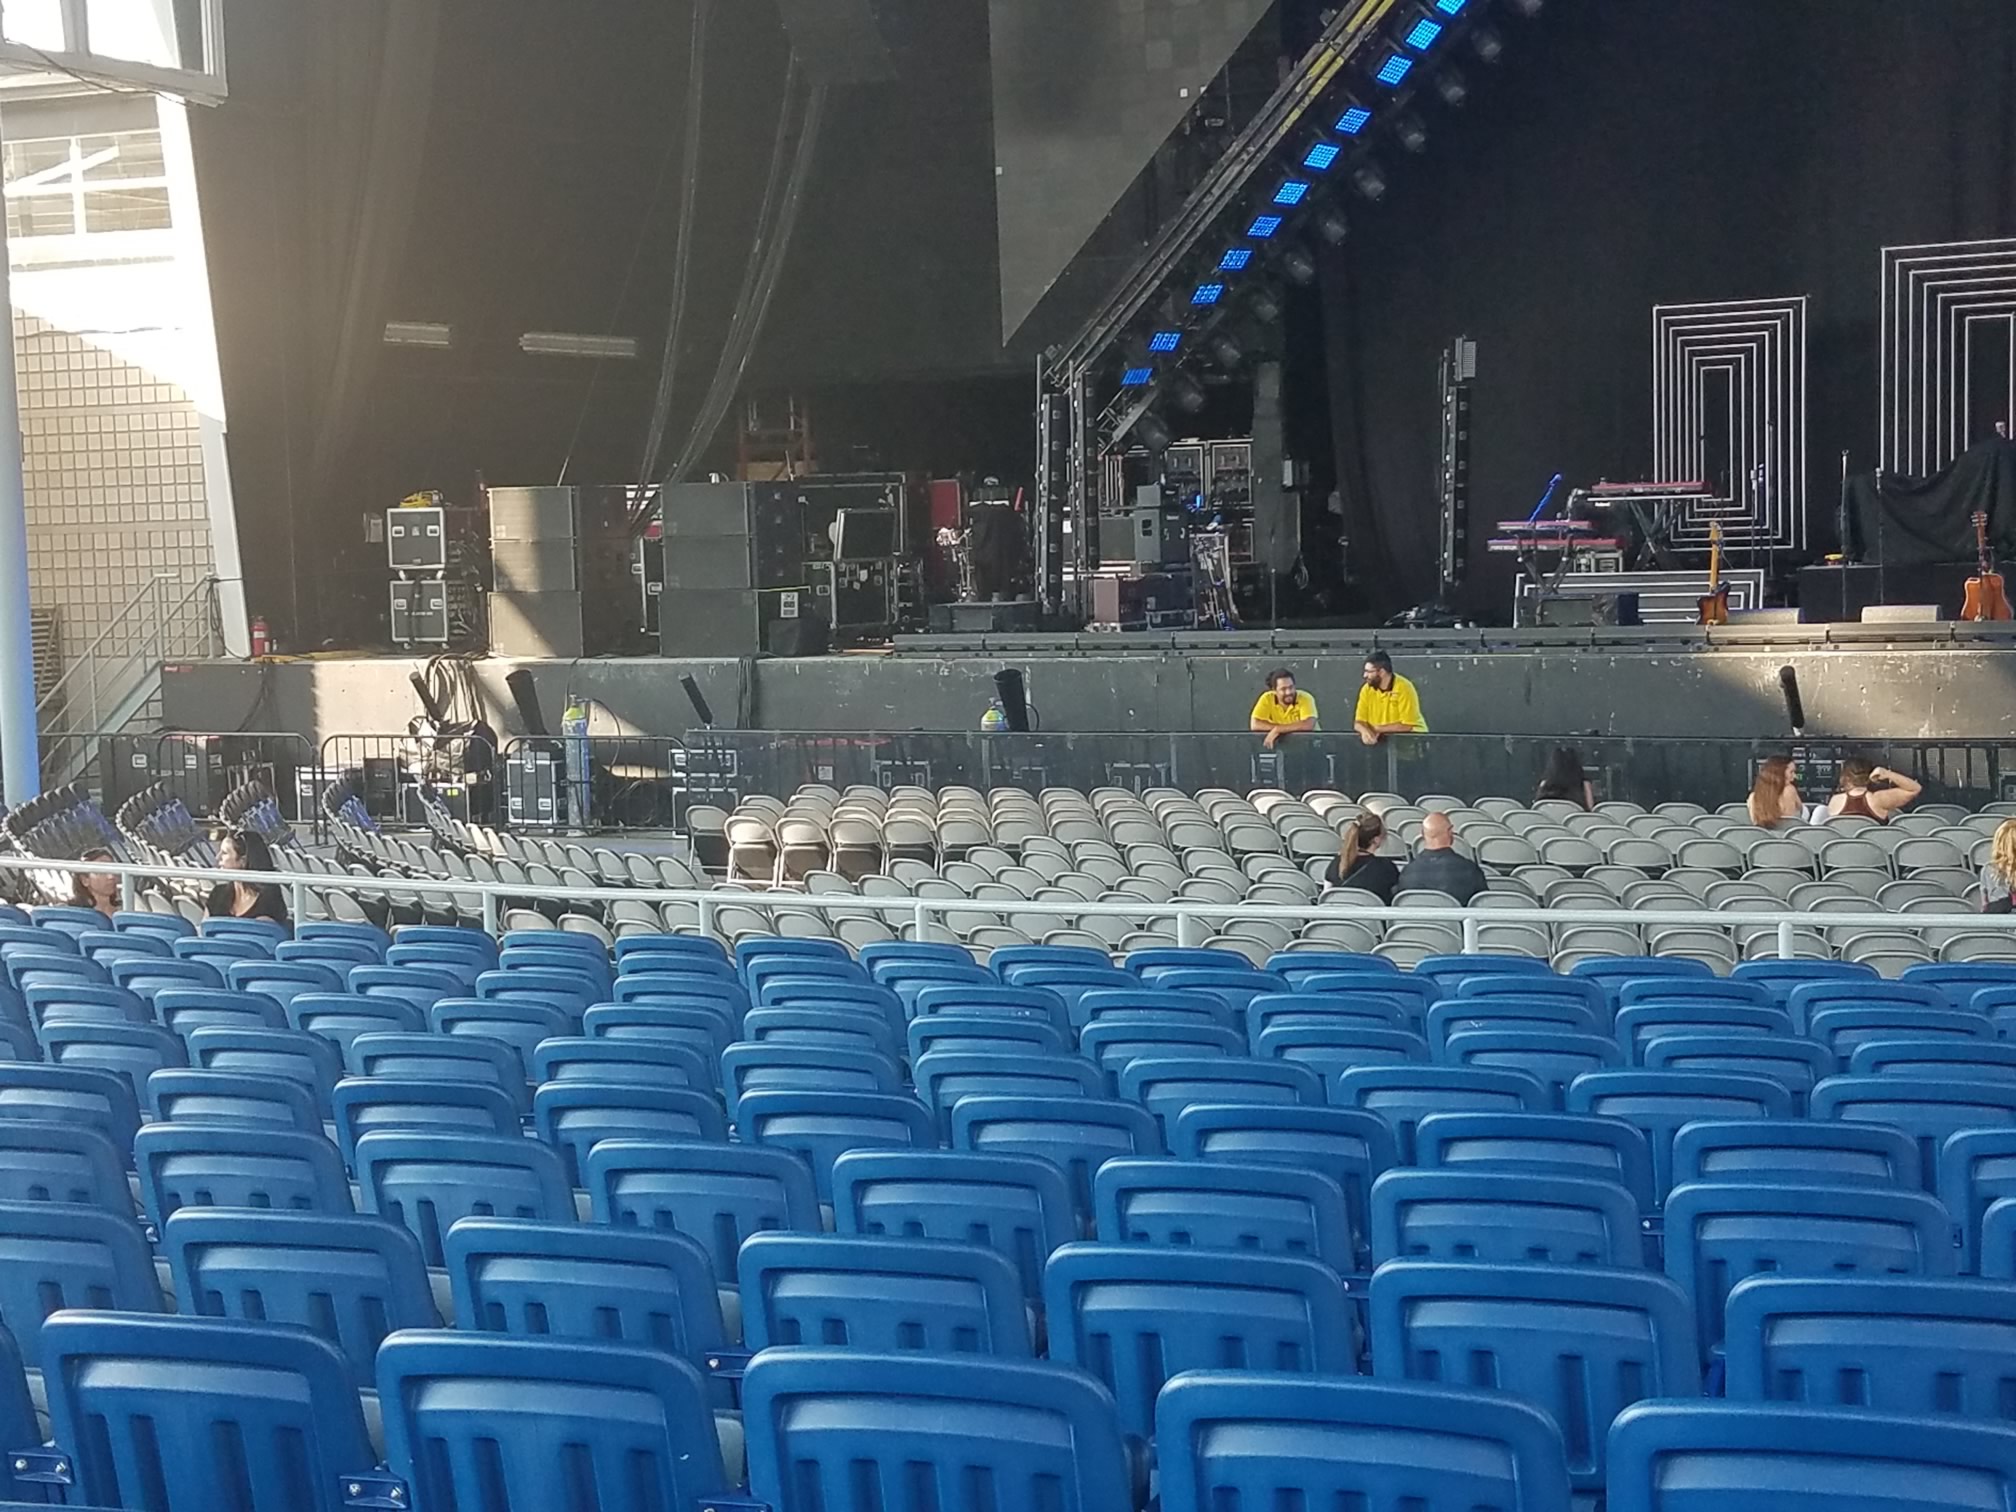 Budweiserstage Section Box Seats 20180419 2343 